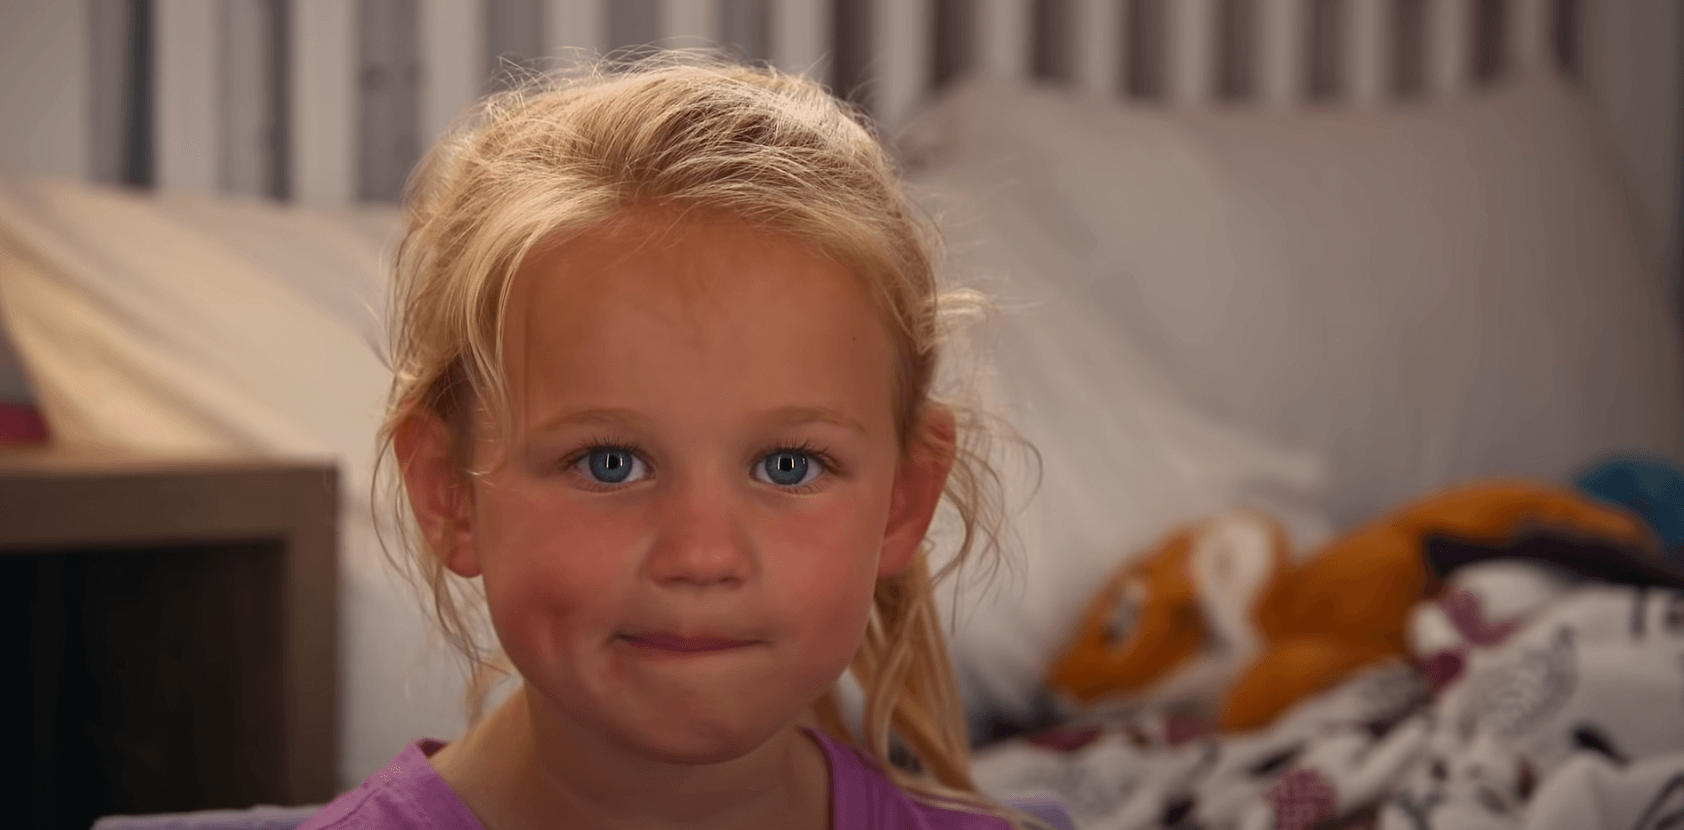 'OutDaughtered' Season 9 star Riley Busby